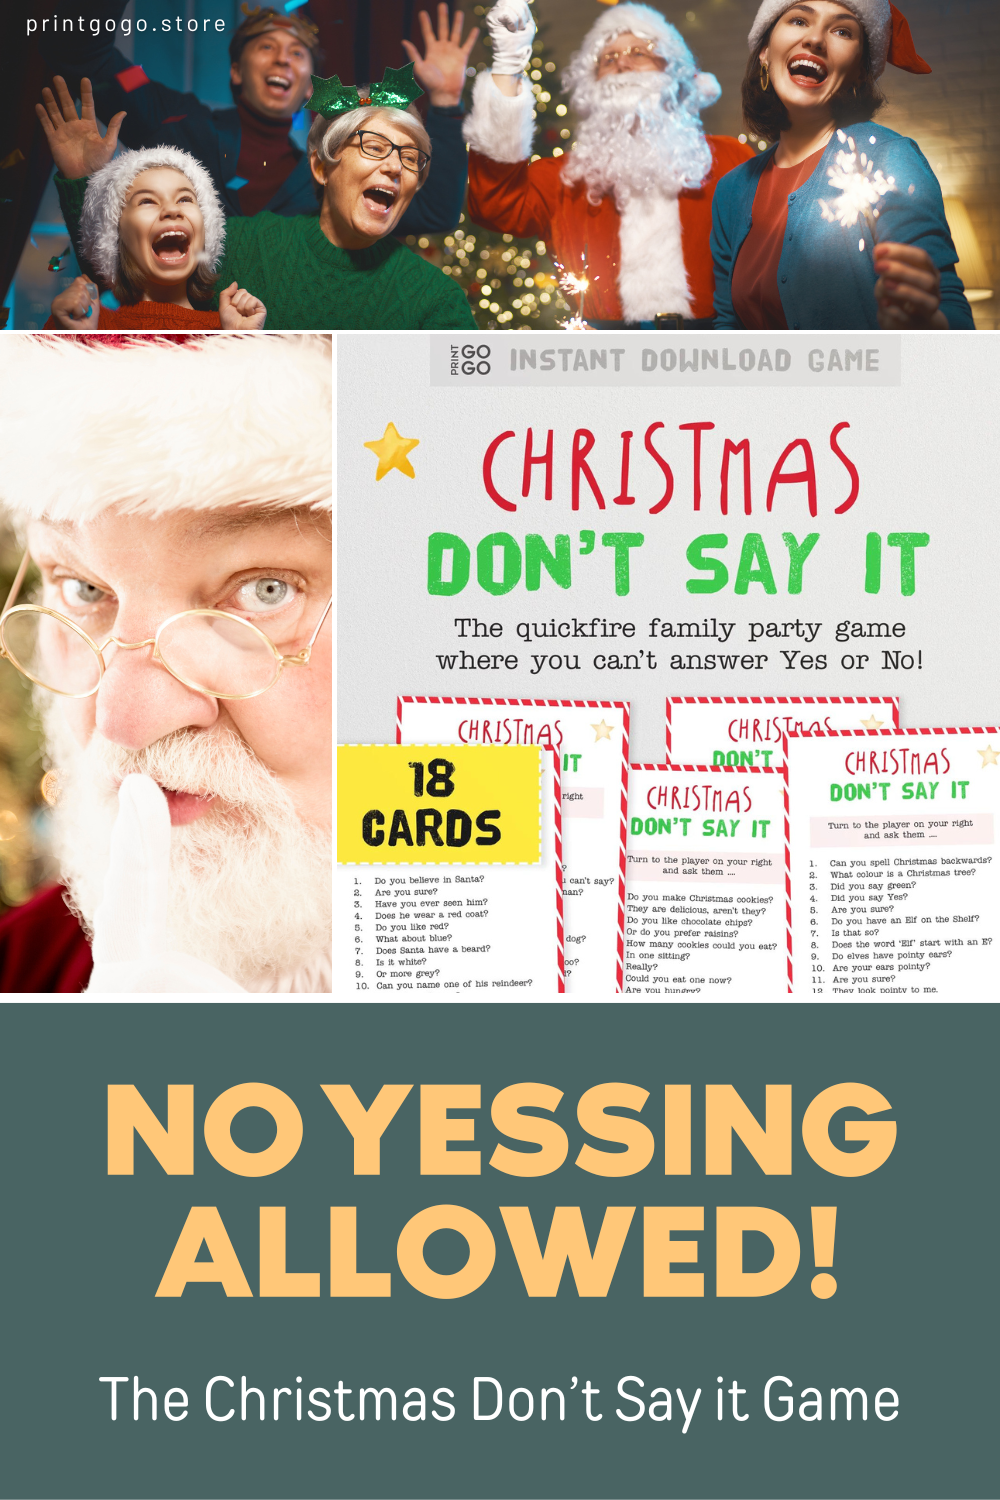 No Yessing Allowed: The Christmas Don't Say It Game